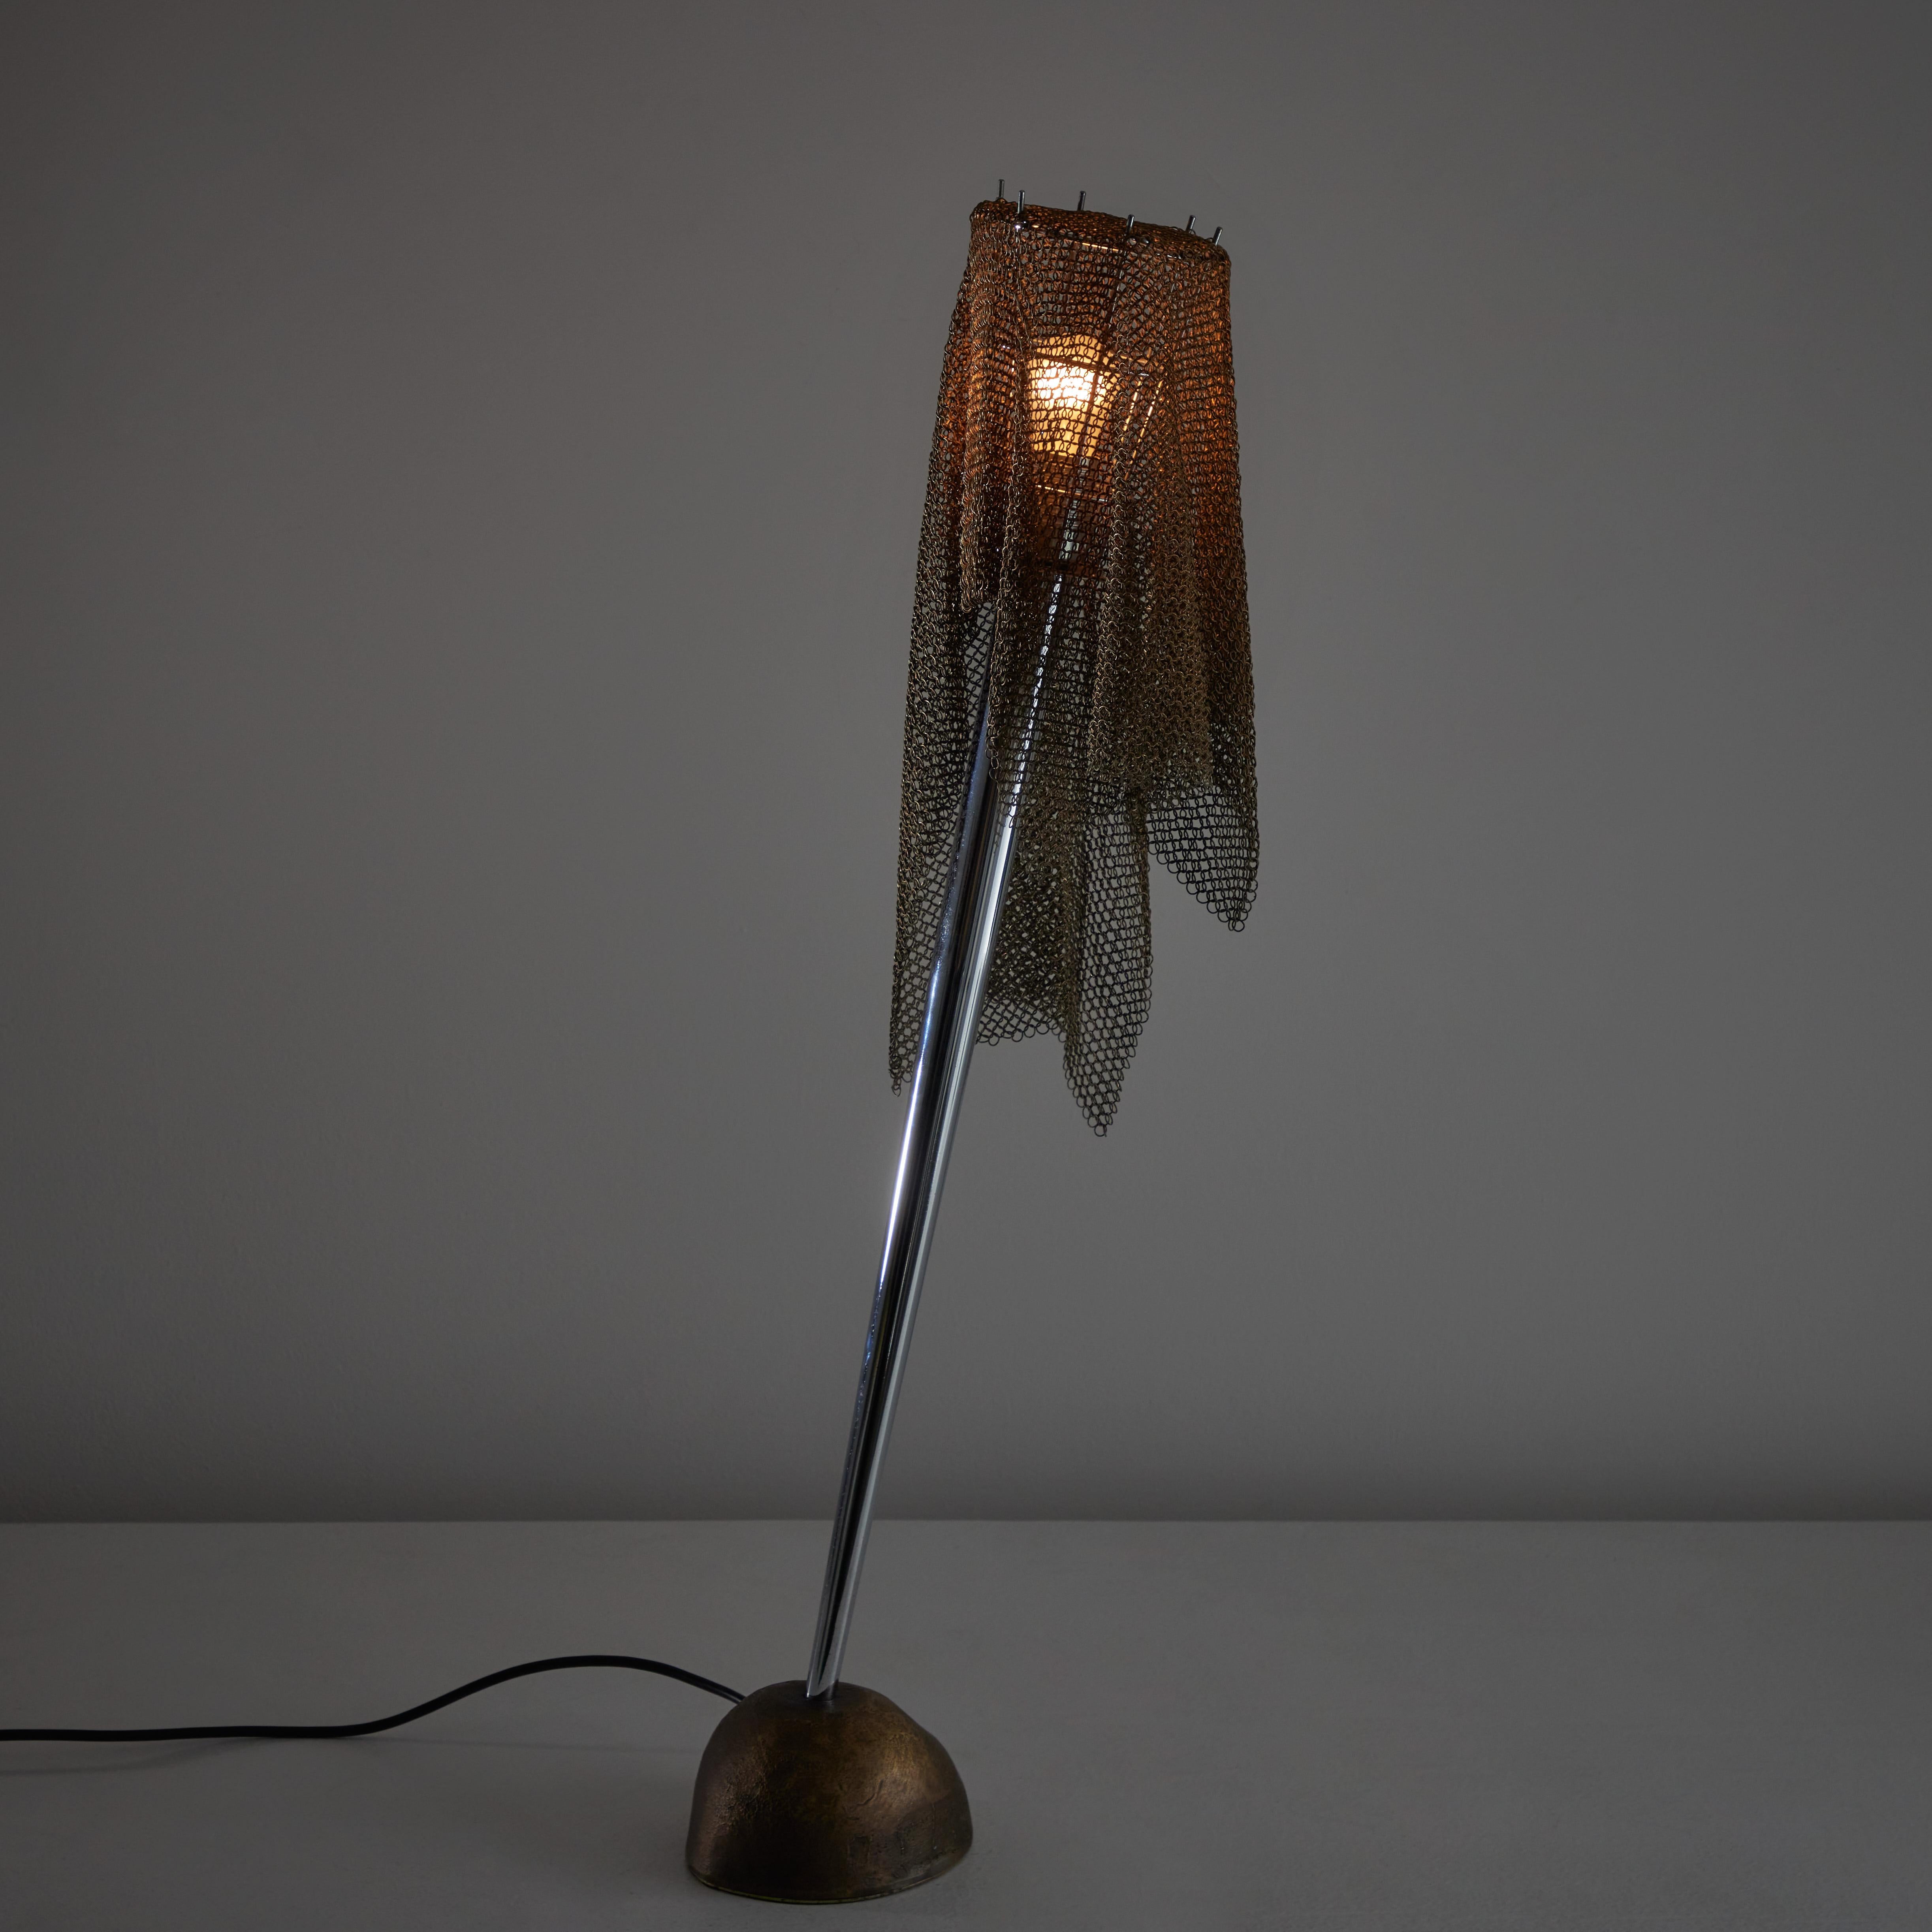 'Ecate' table lamp by Toni Cordero for Artemide. Designed and manufactured in Italy, circa 1990. A stone-like, cast-bronze base and conical stem with both brass and steel chain-mail shade. Stem and shade use a counter-balanced system when draped to